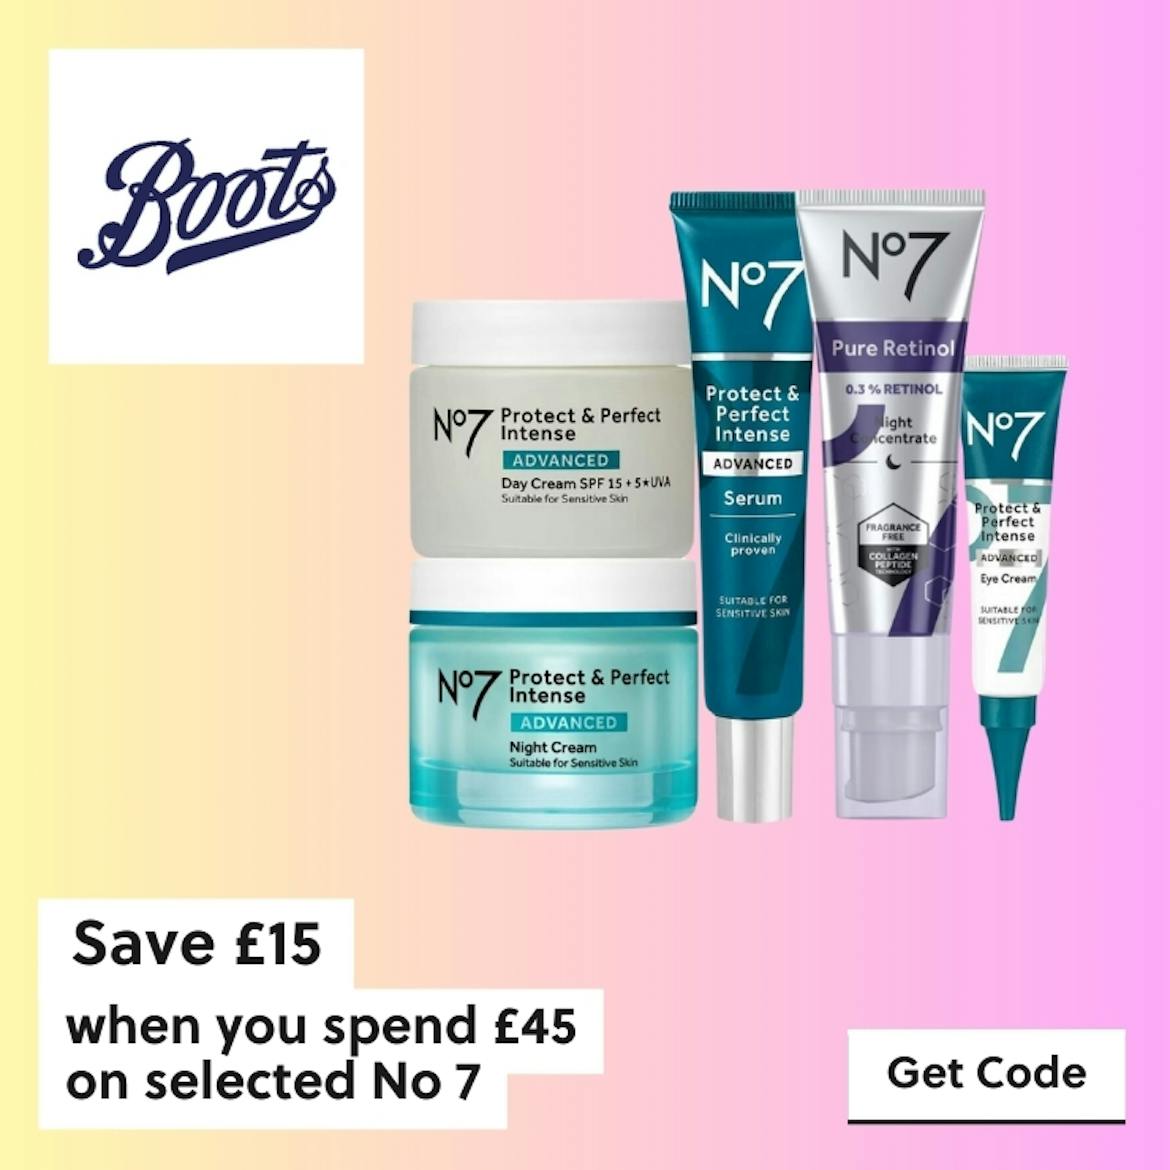 £15 off when you spend £45 on No7